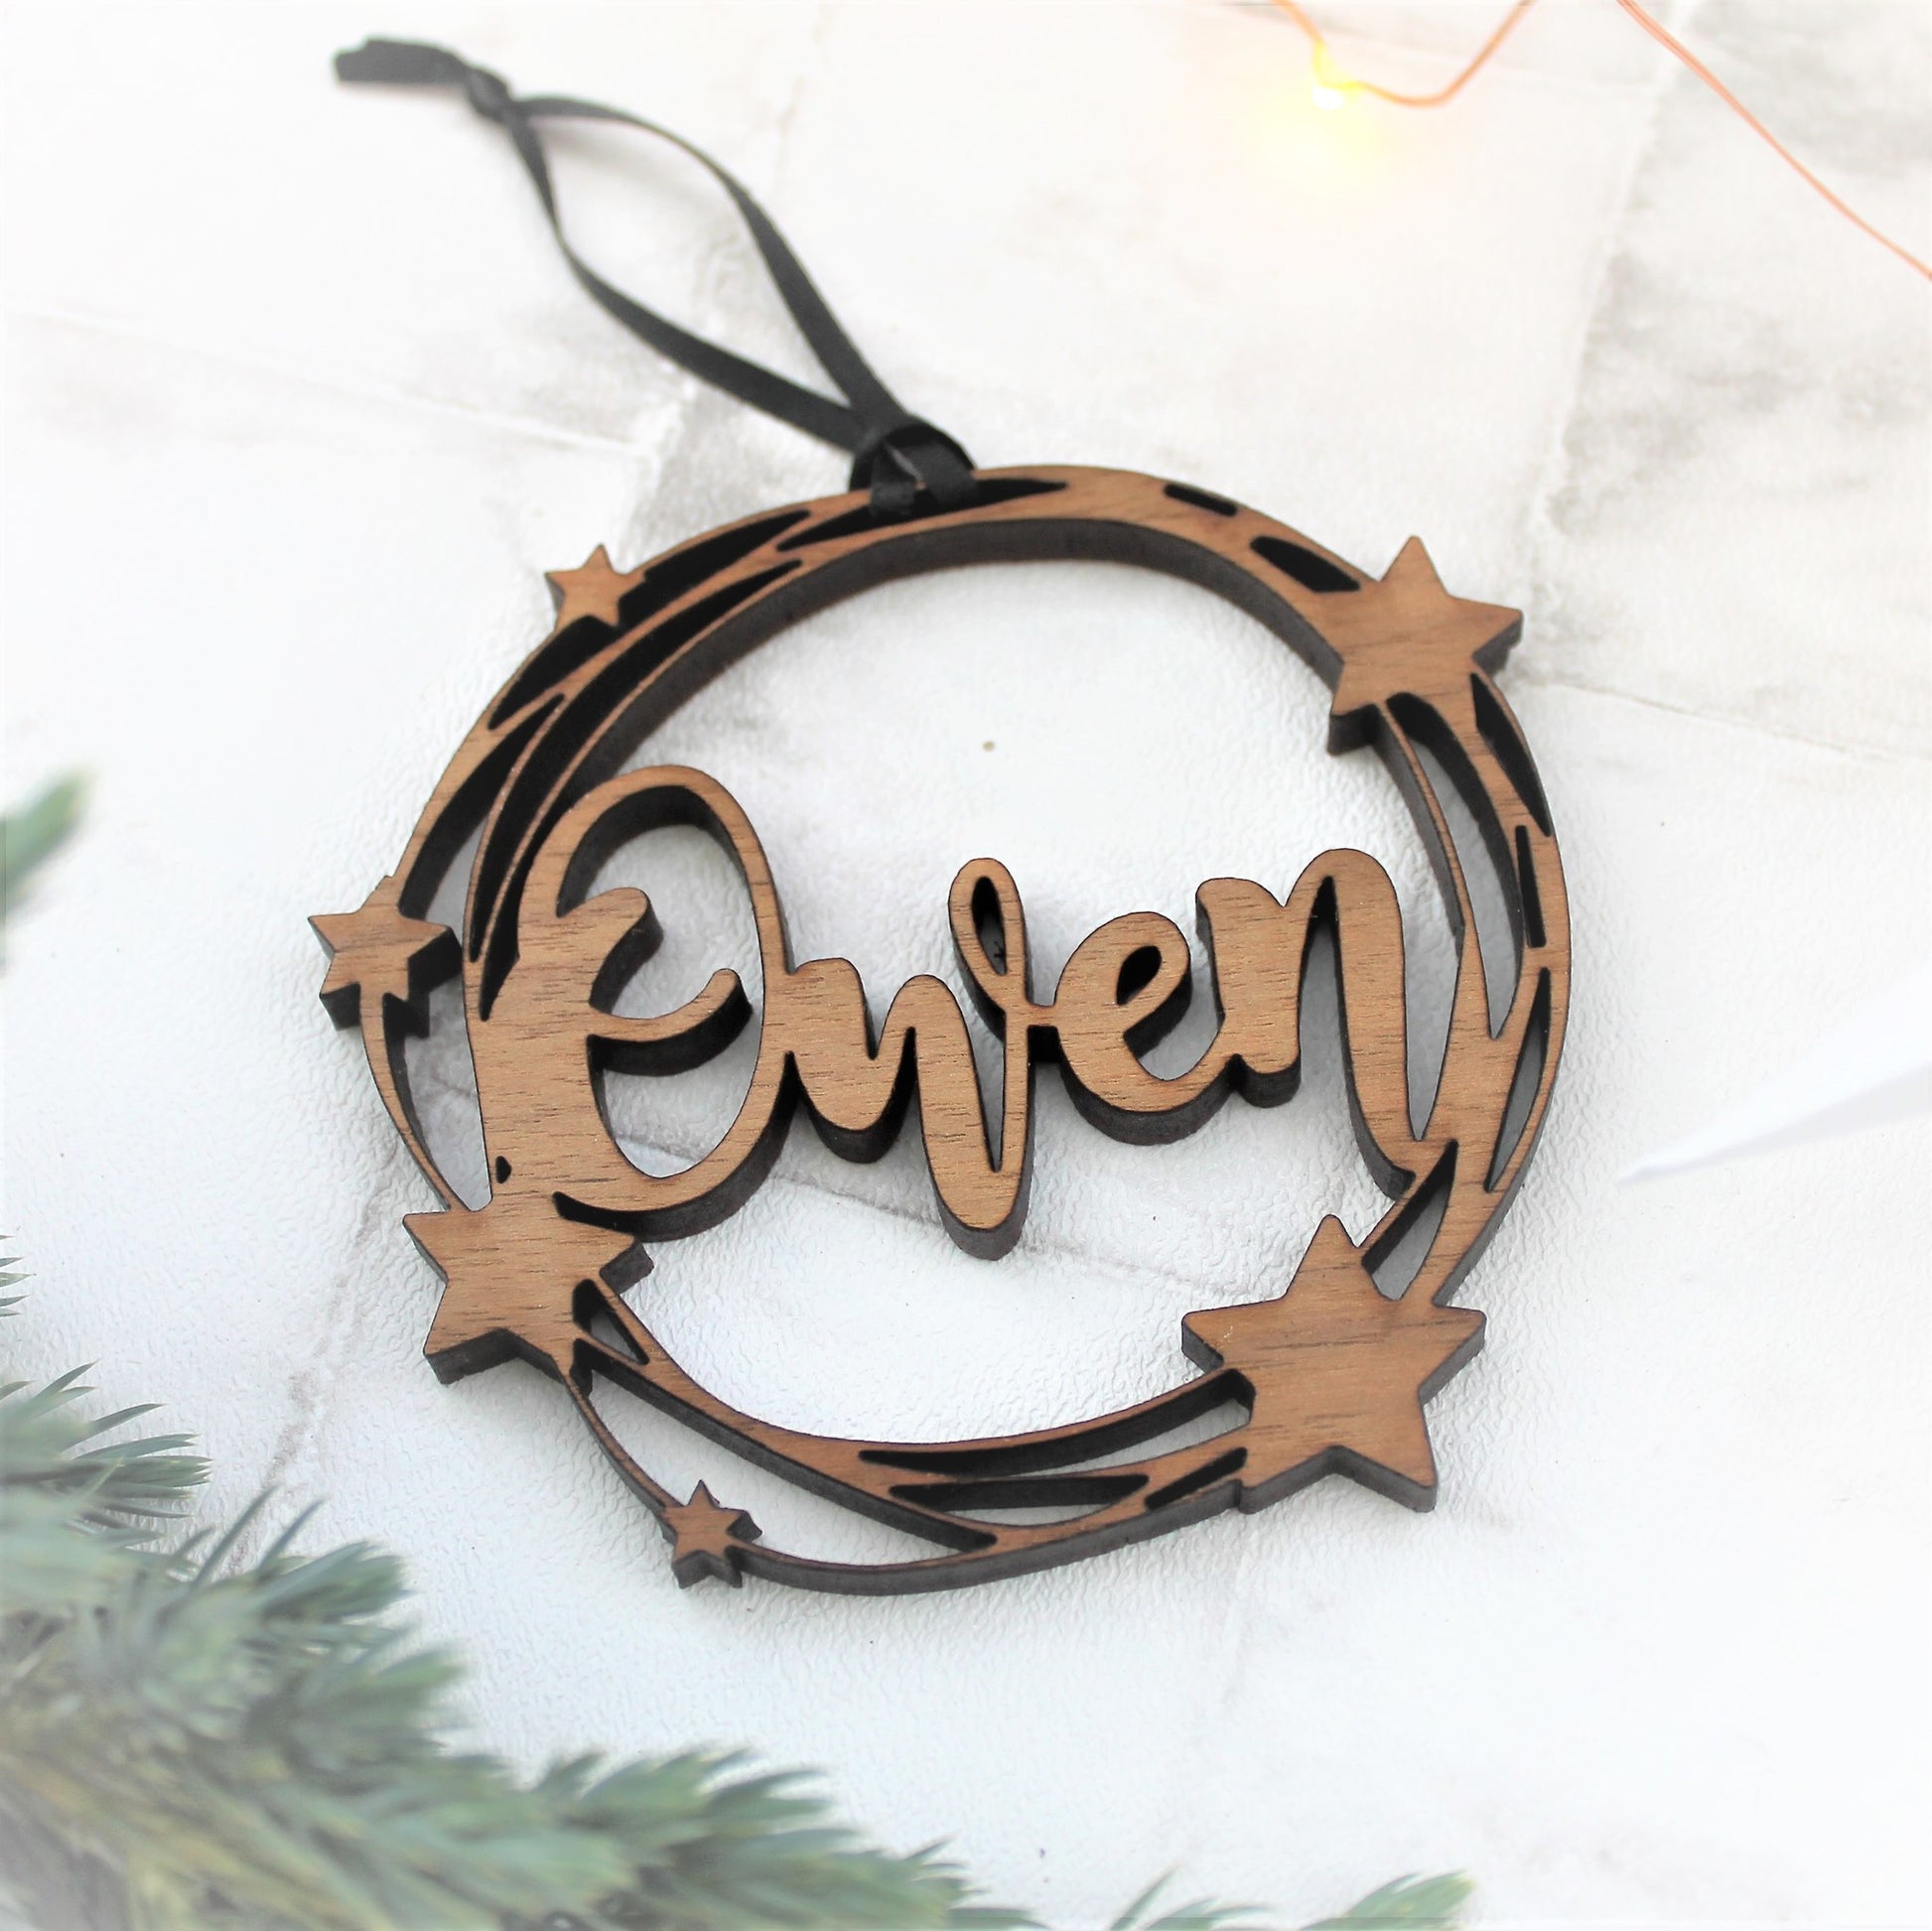 personalised name bauble made from wood with a cut out star design